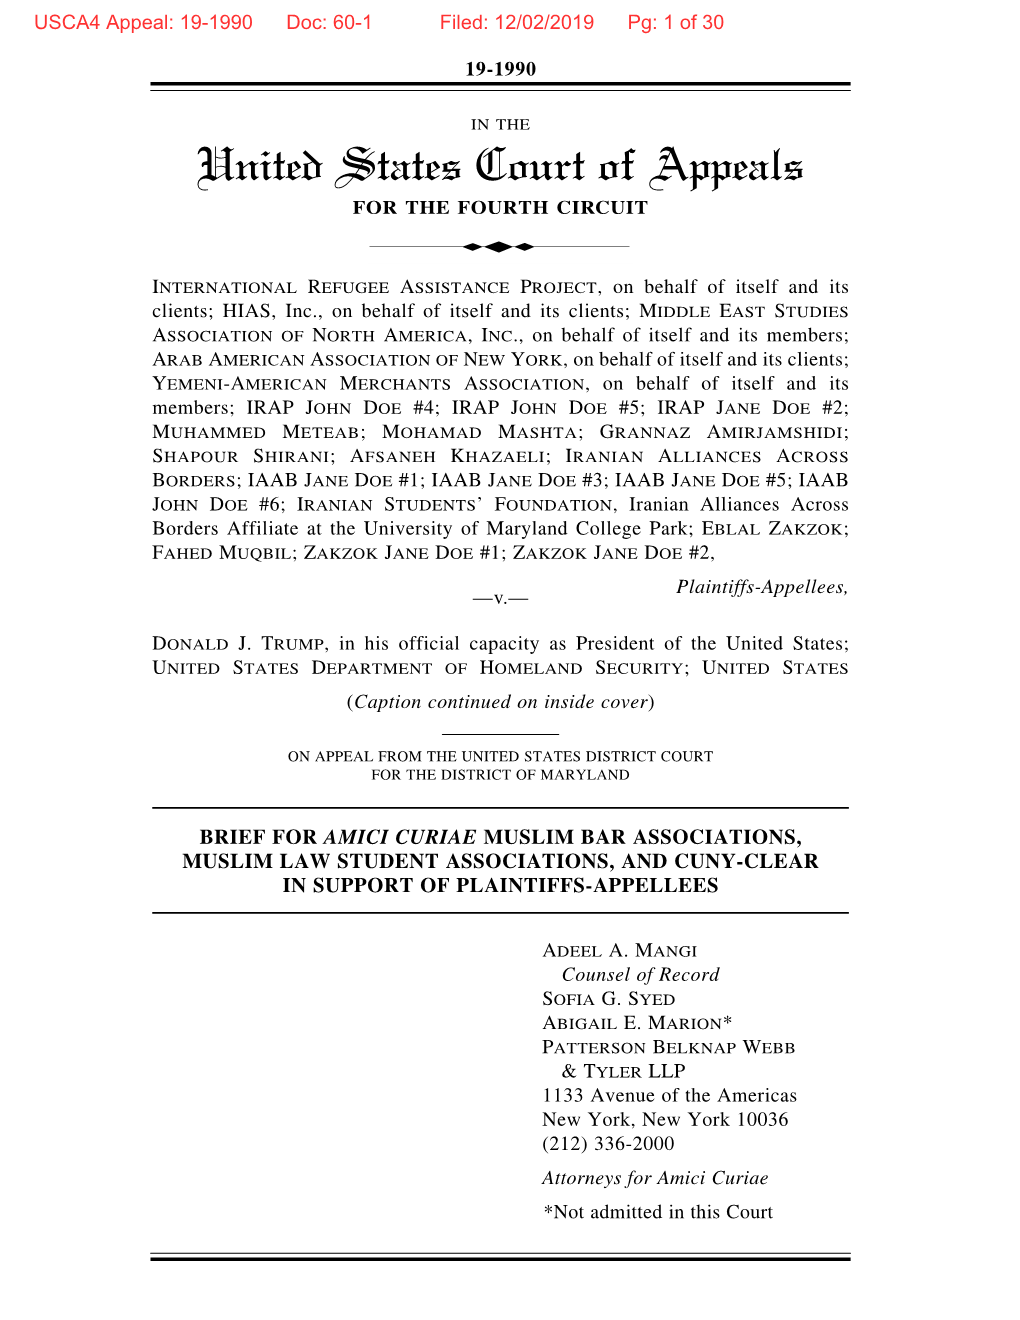 Brief for Amici Curiae Muslim Bar Associations, Muslim Law Student Associations, and Cuny-Clear in Support of Plaintiffs-Appellees